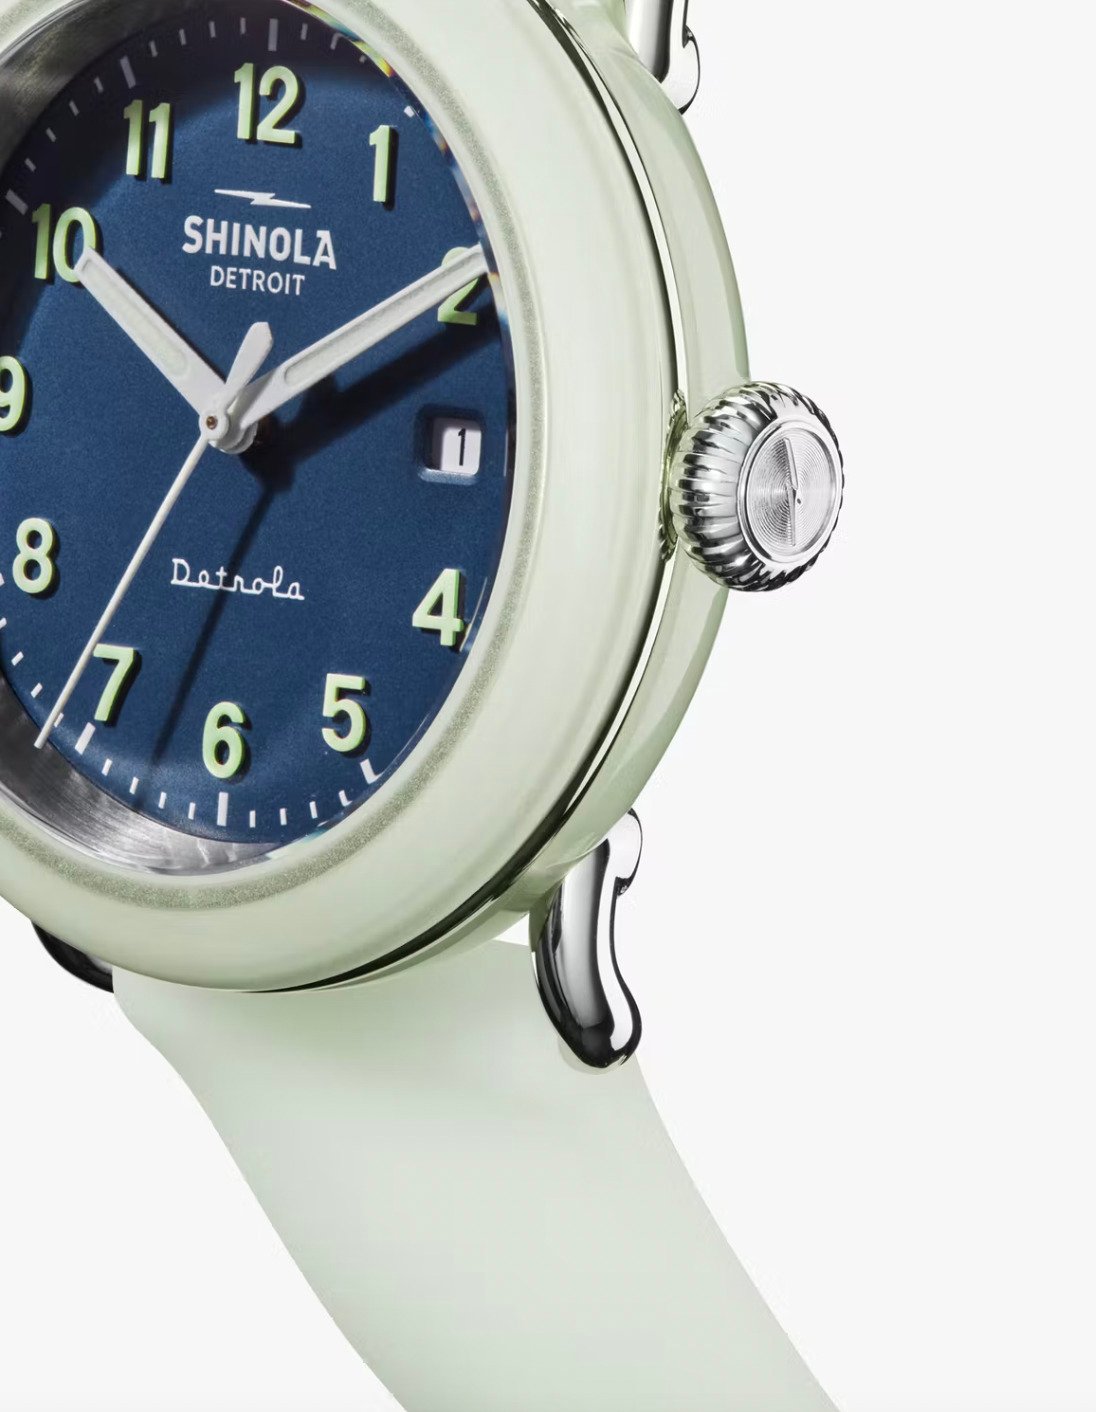 The Shinola UFO Detrola Watch Will Tell You The Time Where Other Watches Can&#8217;t